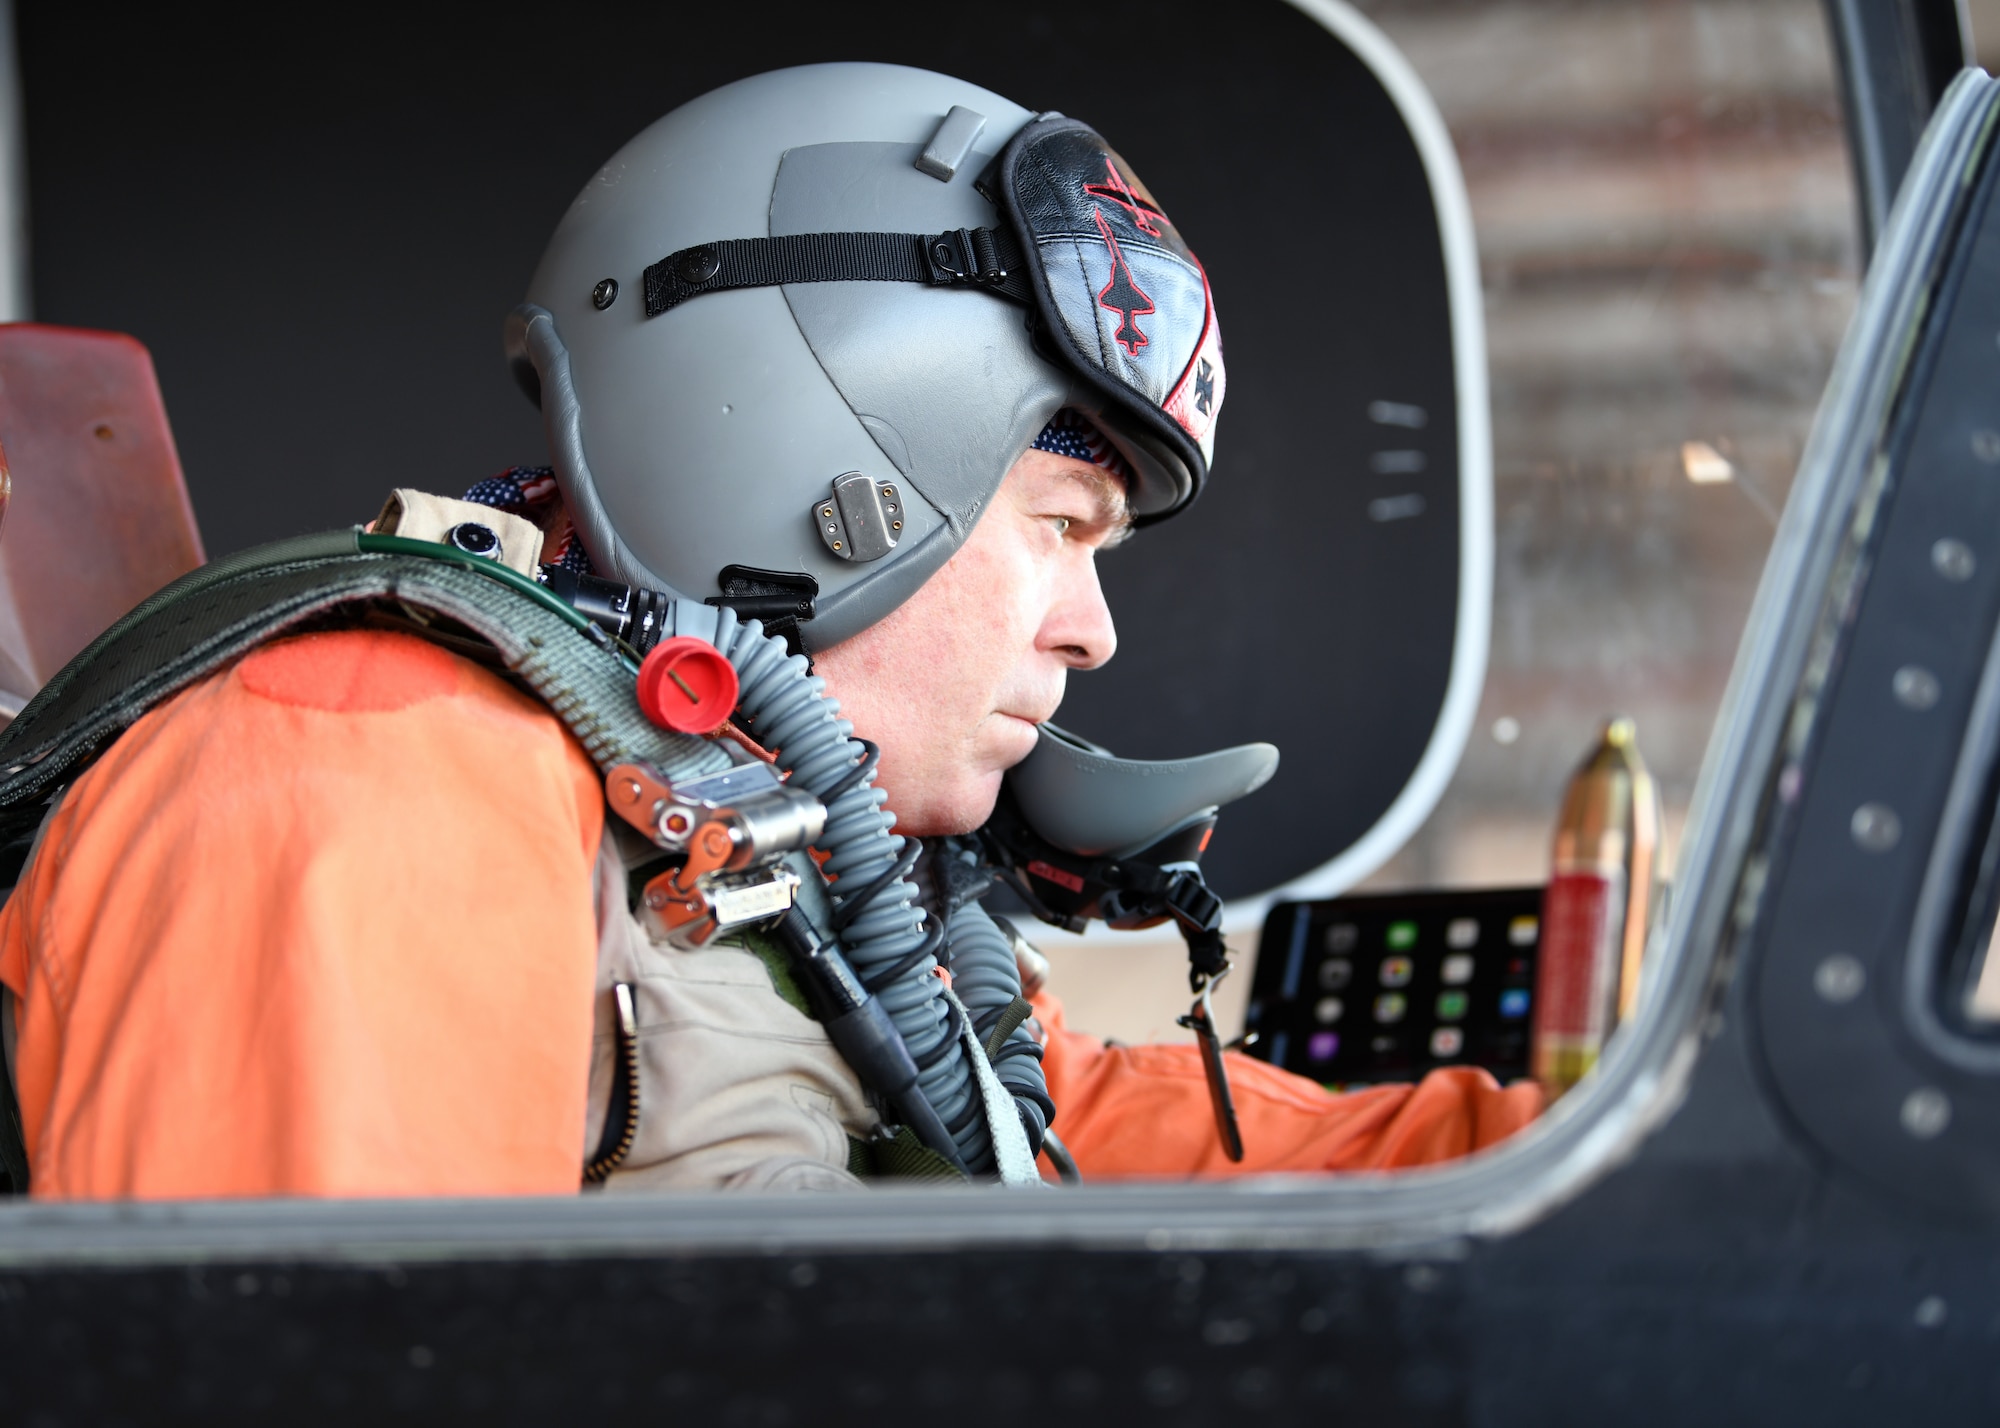 Retired Lt. Col Jonathan Huggins, 1st Reconnaissance Squadron U-2 instructor pilot, performs a preflight inspection before takeoff July 31, 2020 at Beale Air Force Base, California. Huggins retired on Sep. 26, 2014 and has served as a U-2 pilot instructor for 15 of the 18 years he’s been flying the U-2 as an active duty pilot. (U.S. Air Force photo by Airman 1st Class Luis A. Ruiz-Vazquez)